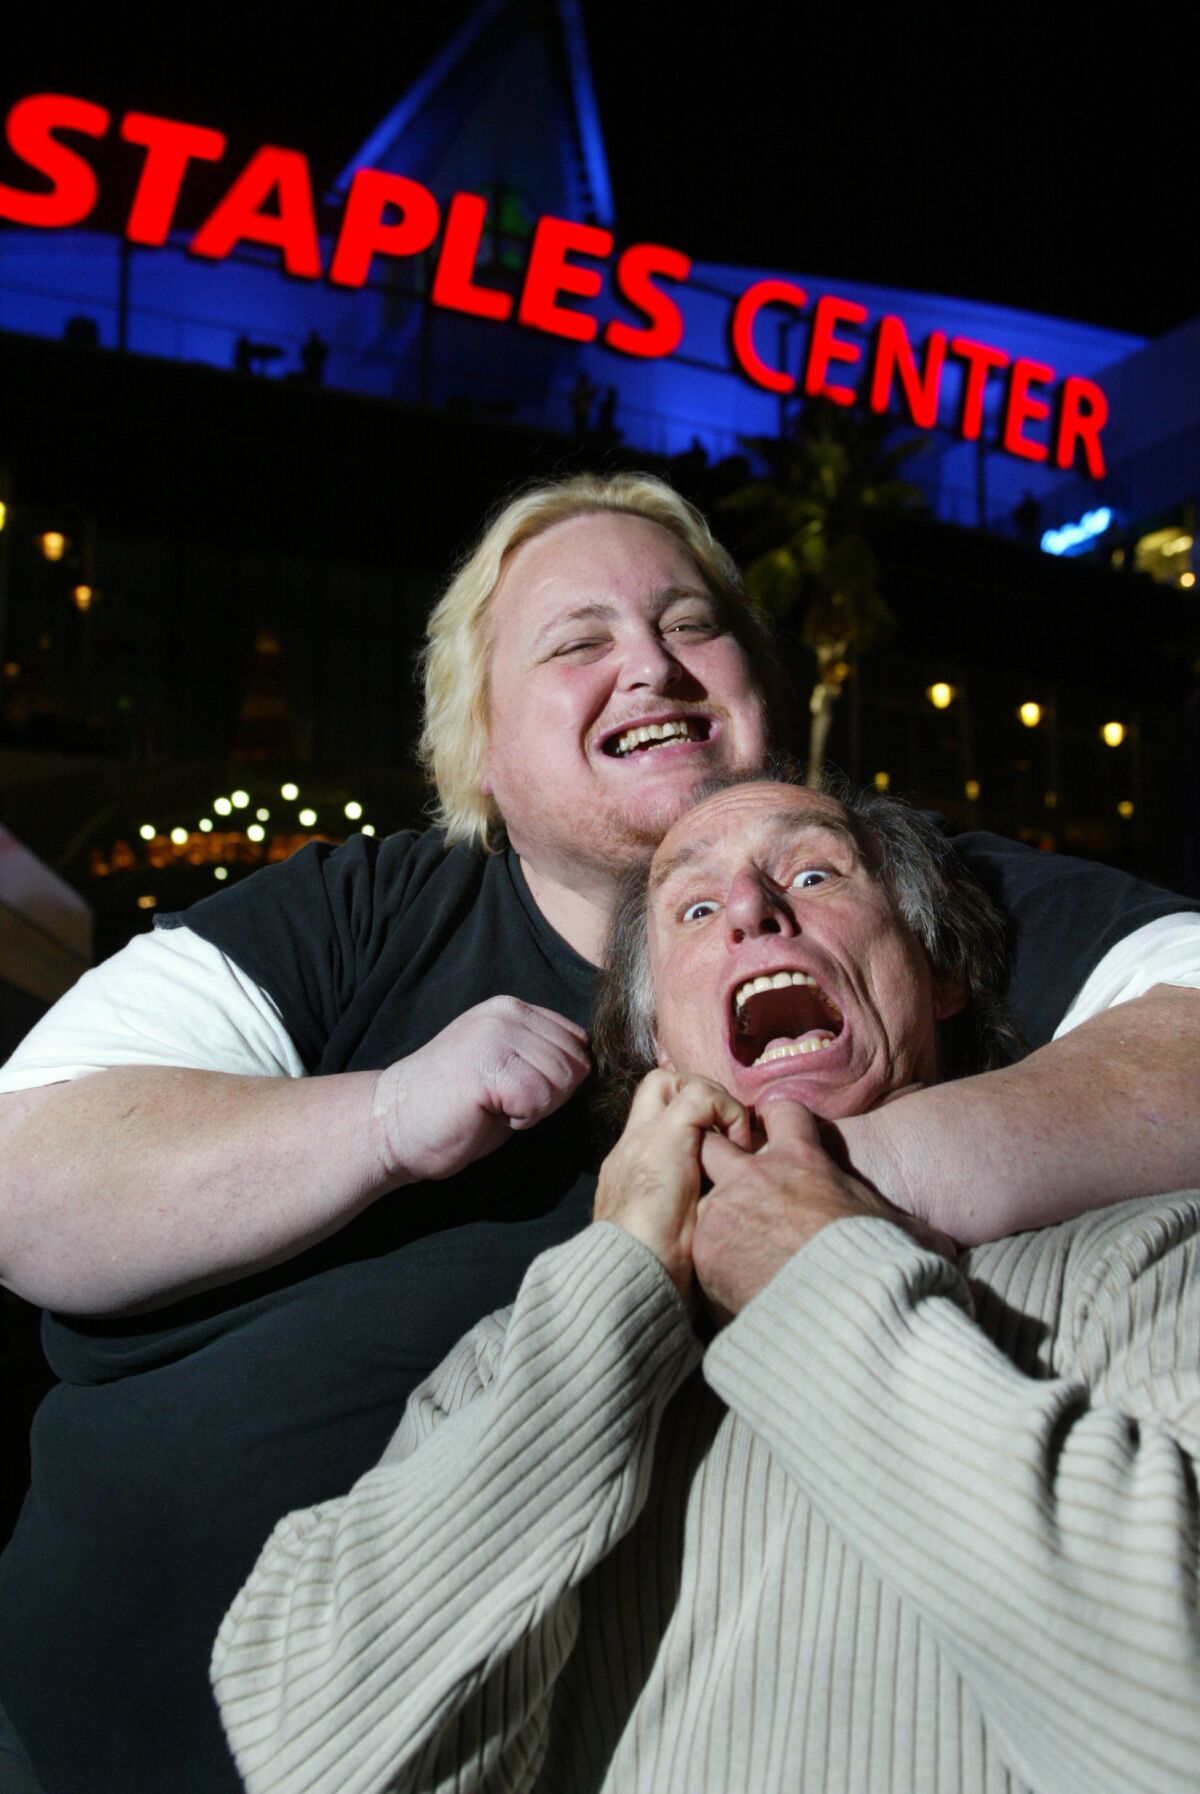 Sports talk radio personalities Joe McDonnell, left, and Doug Krikorian have a little fun outside Staples Center in 2004.